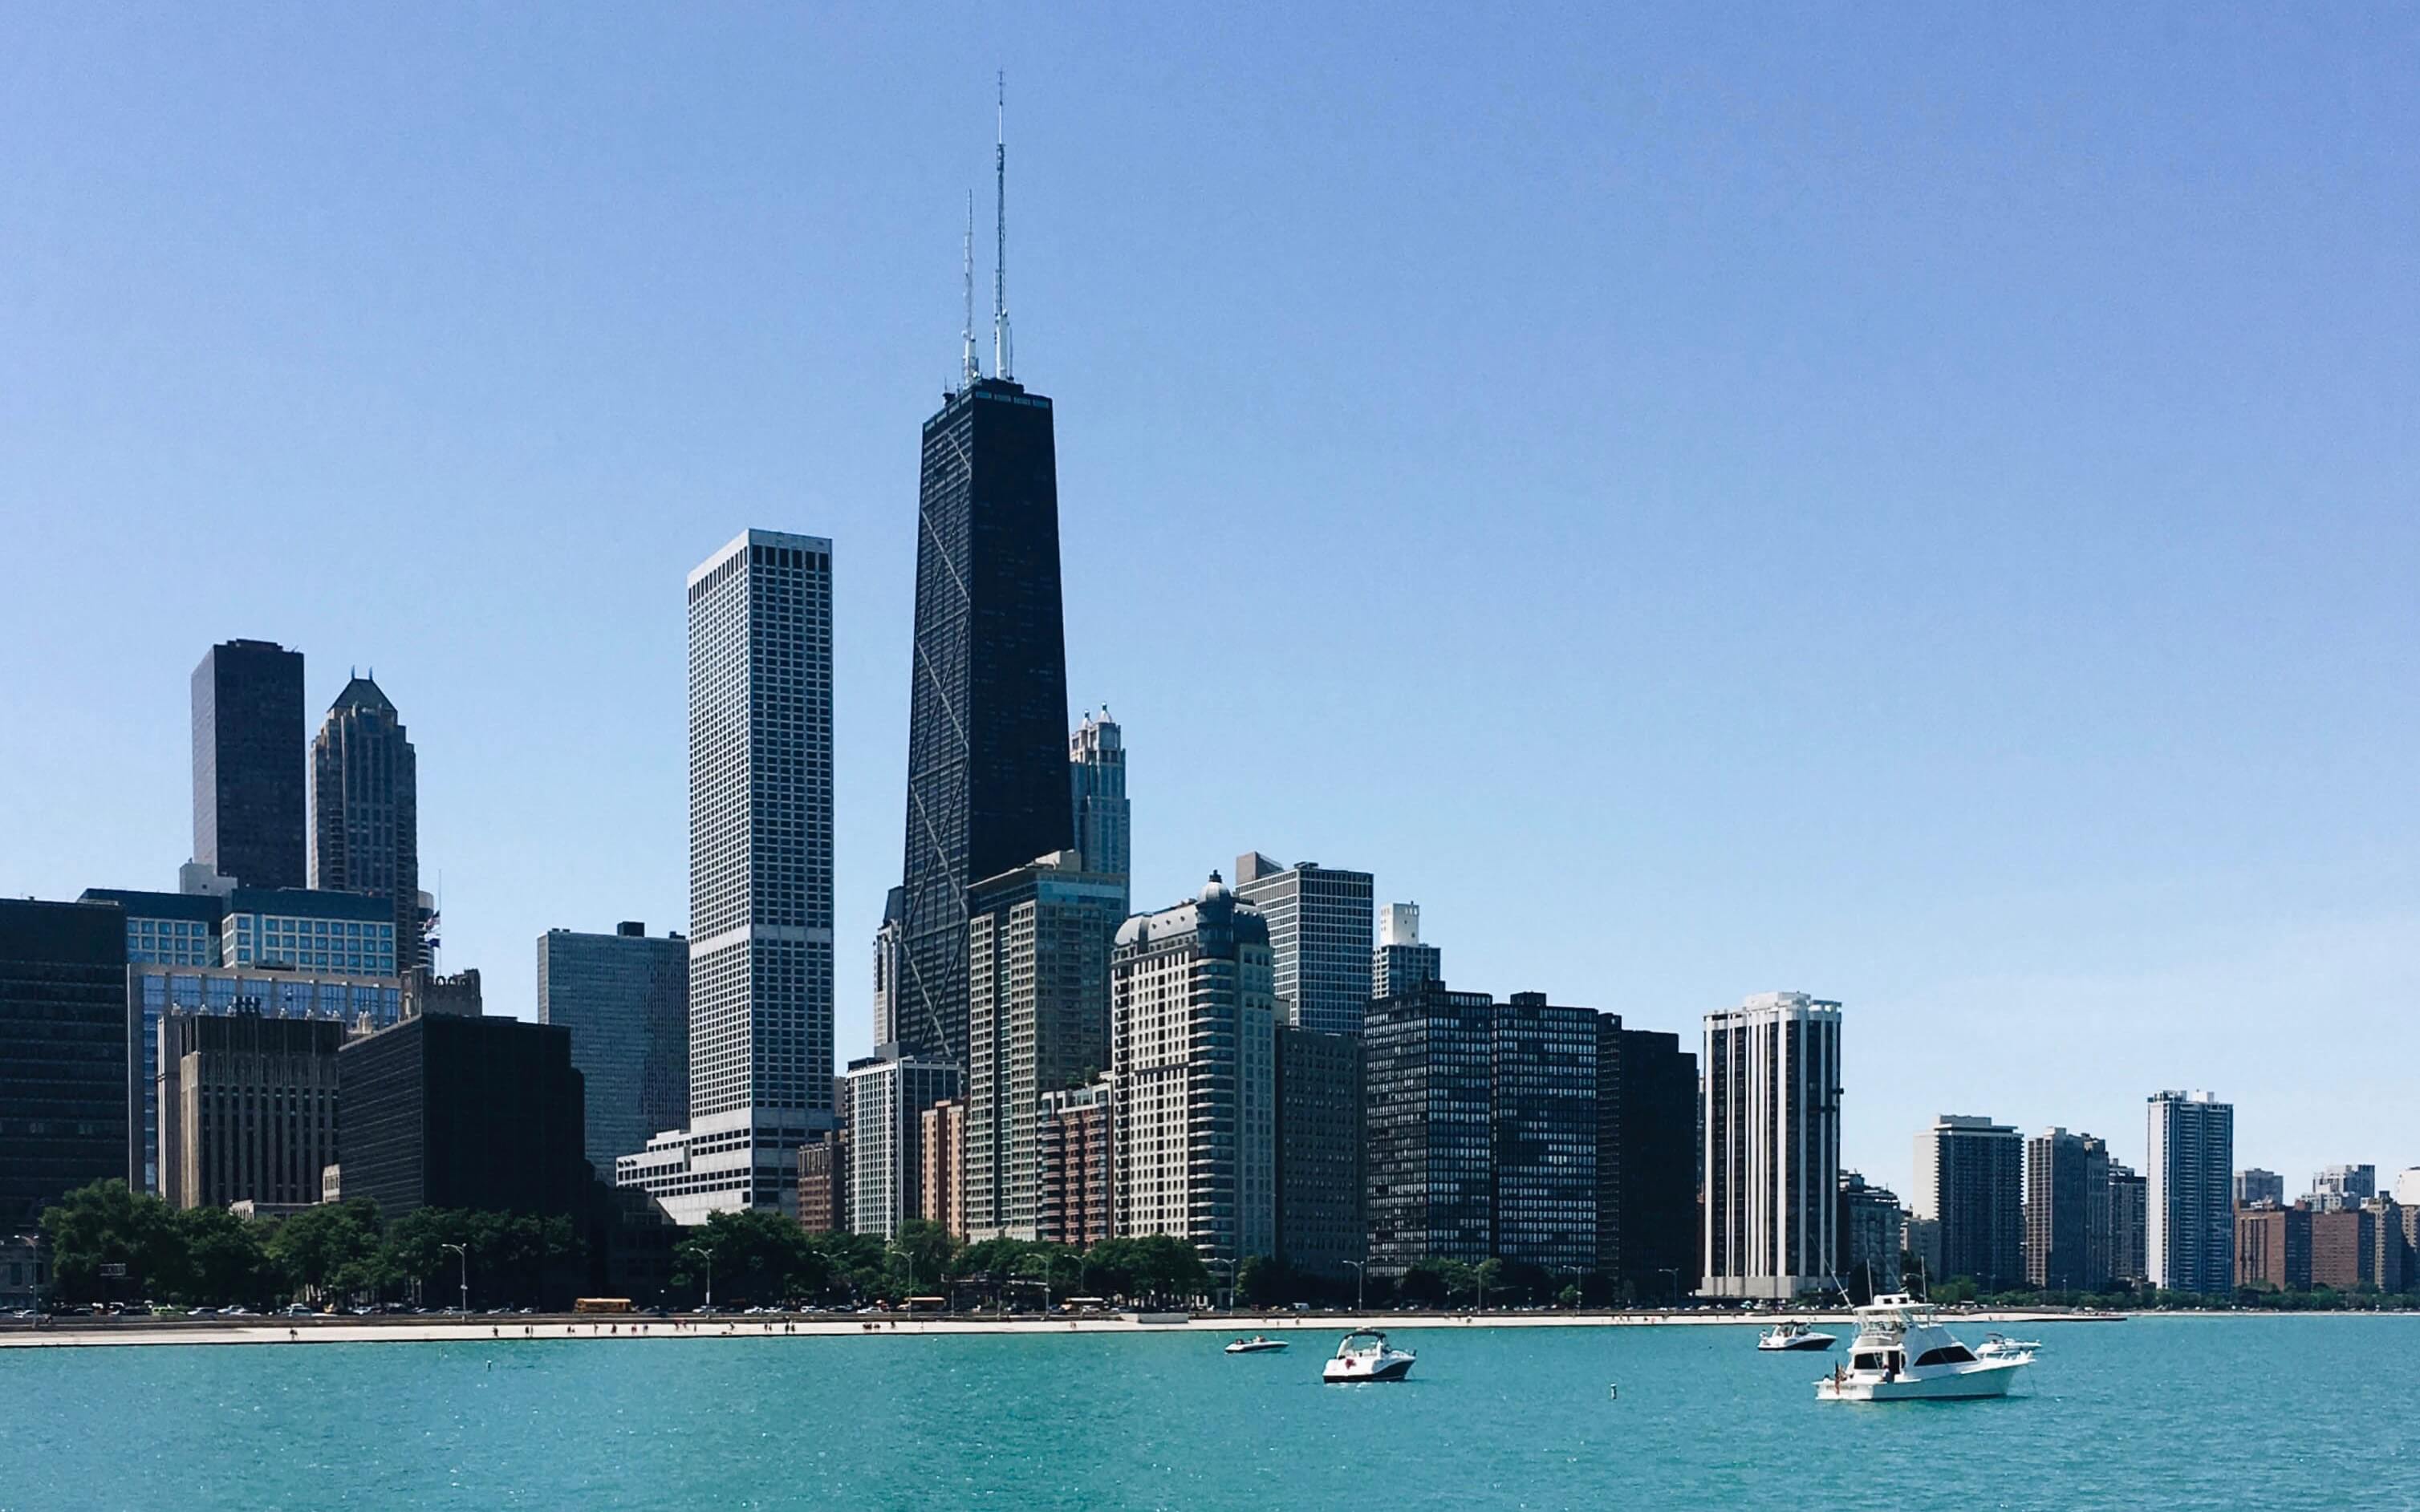 The Chicago City Photo Guide